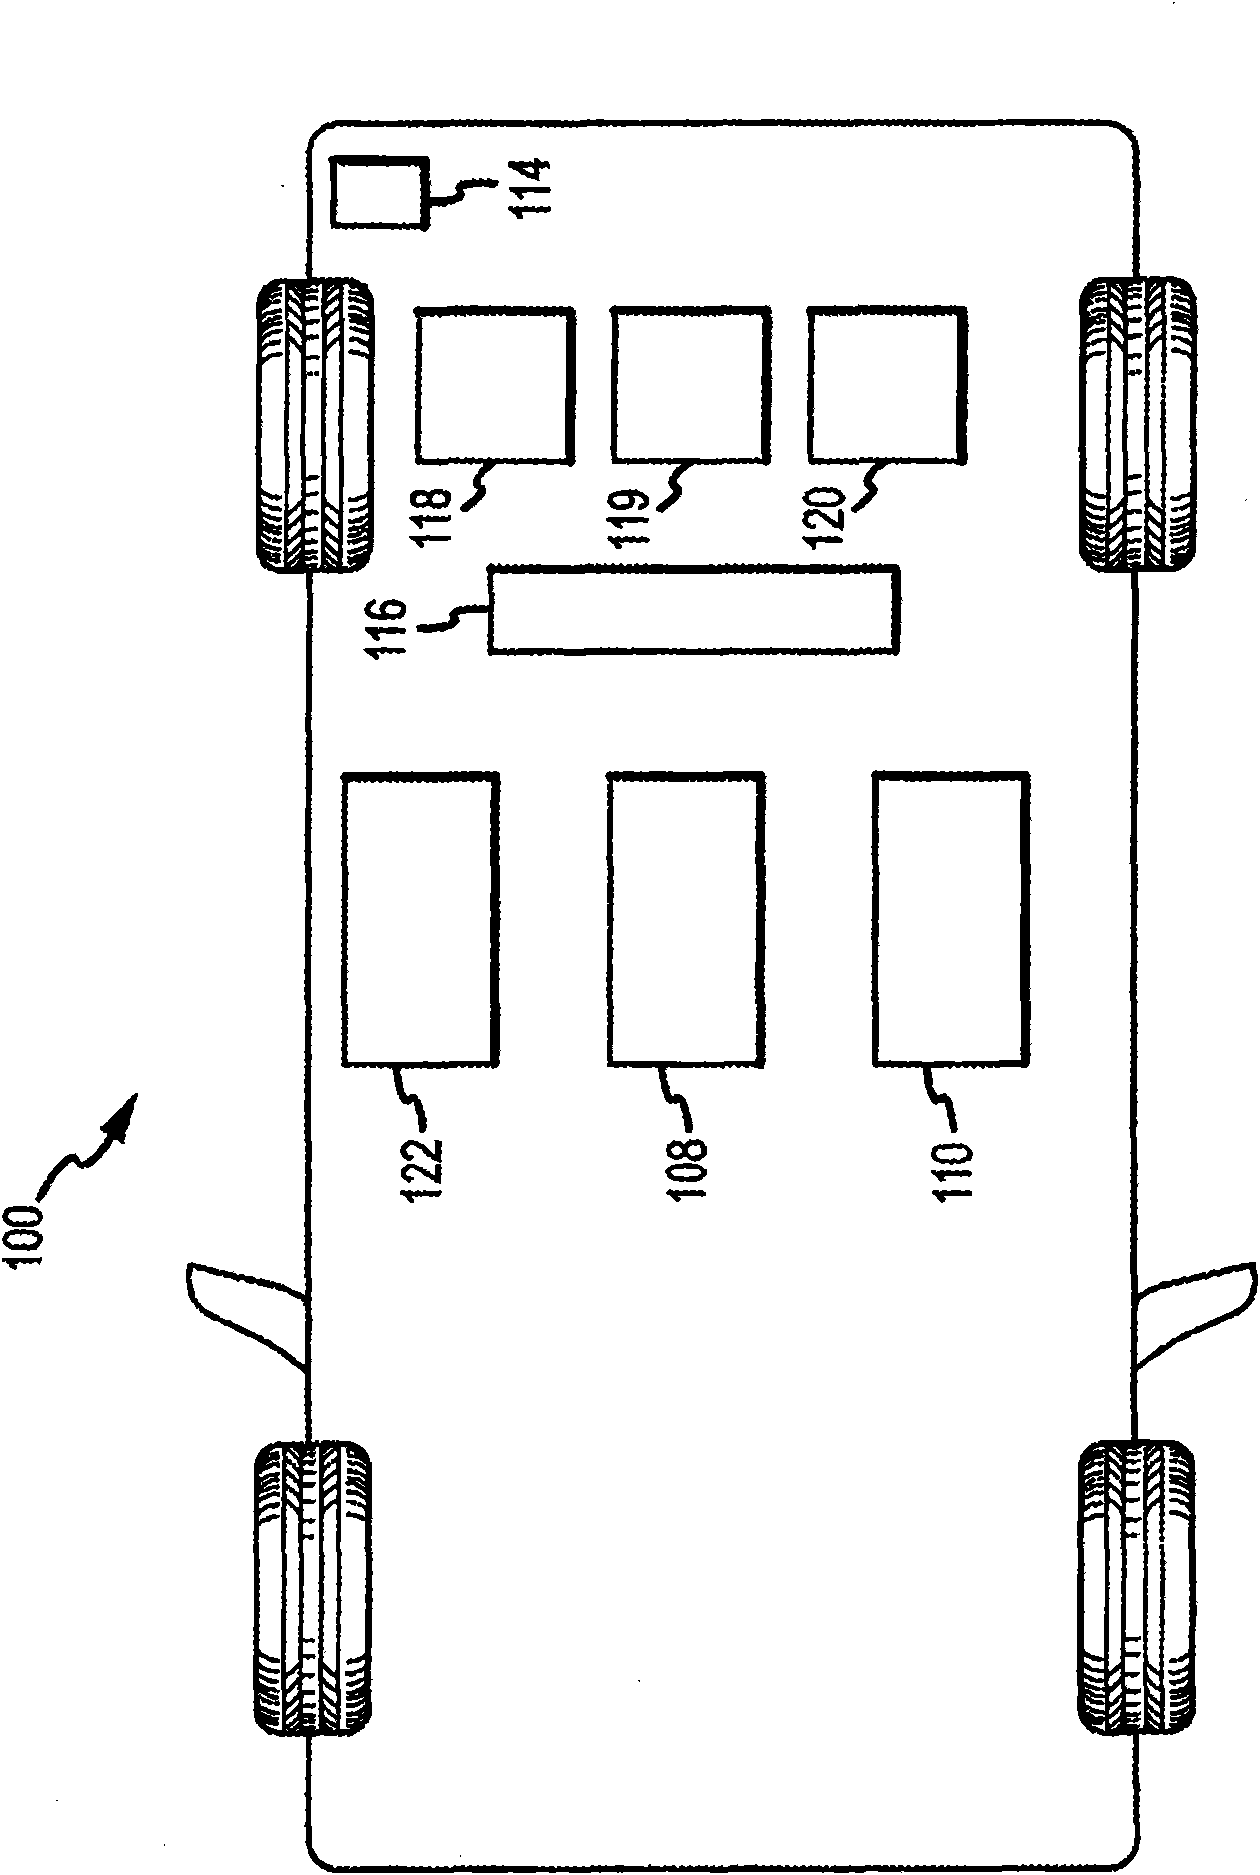 Power processing systems and methods for use in plug-in electric vehicles